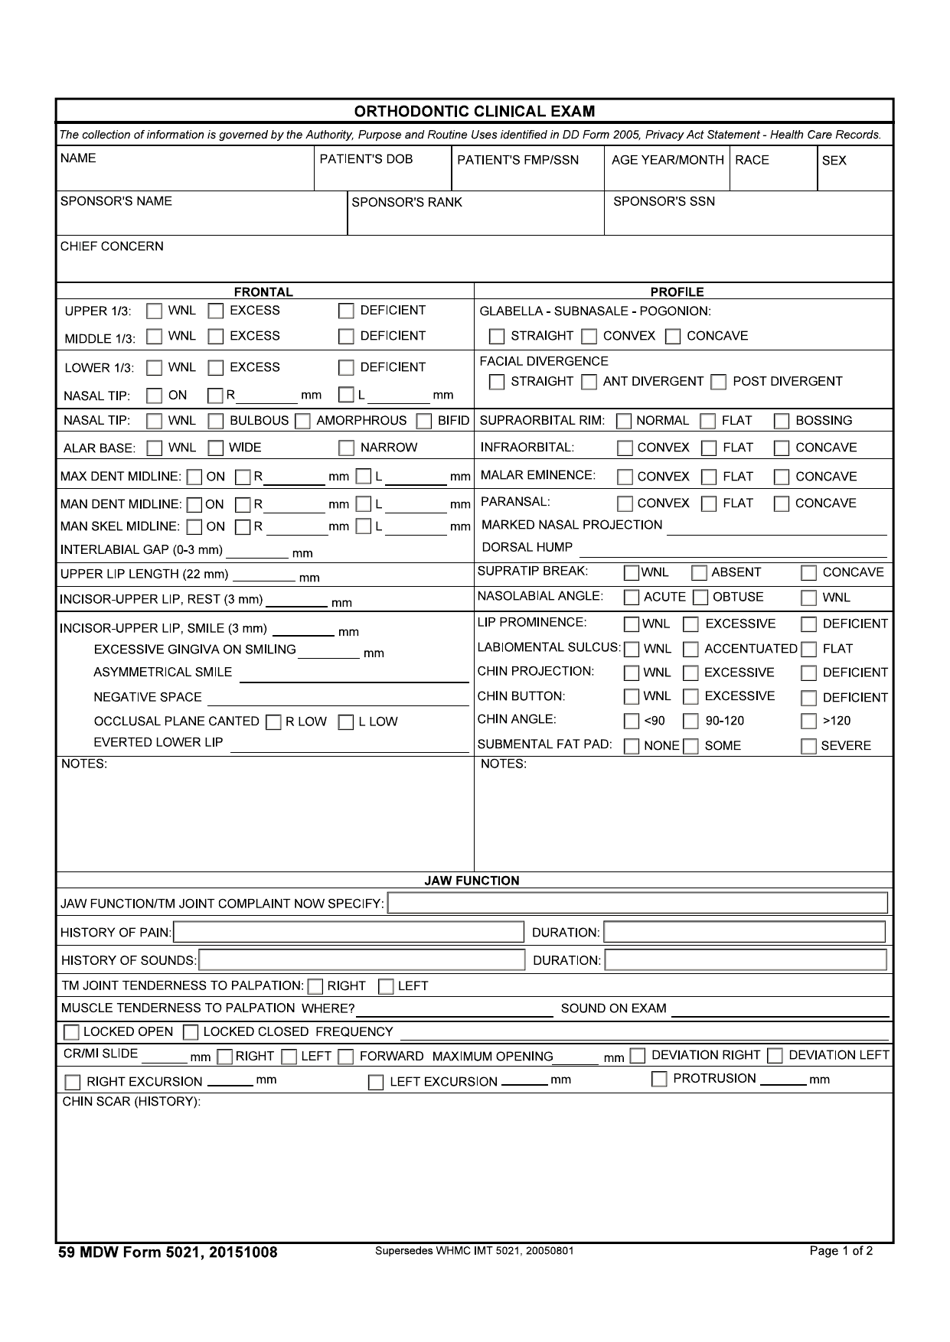 59 MDW Form 5021 Orthodontic Clinical Exam, Page 1